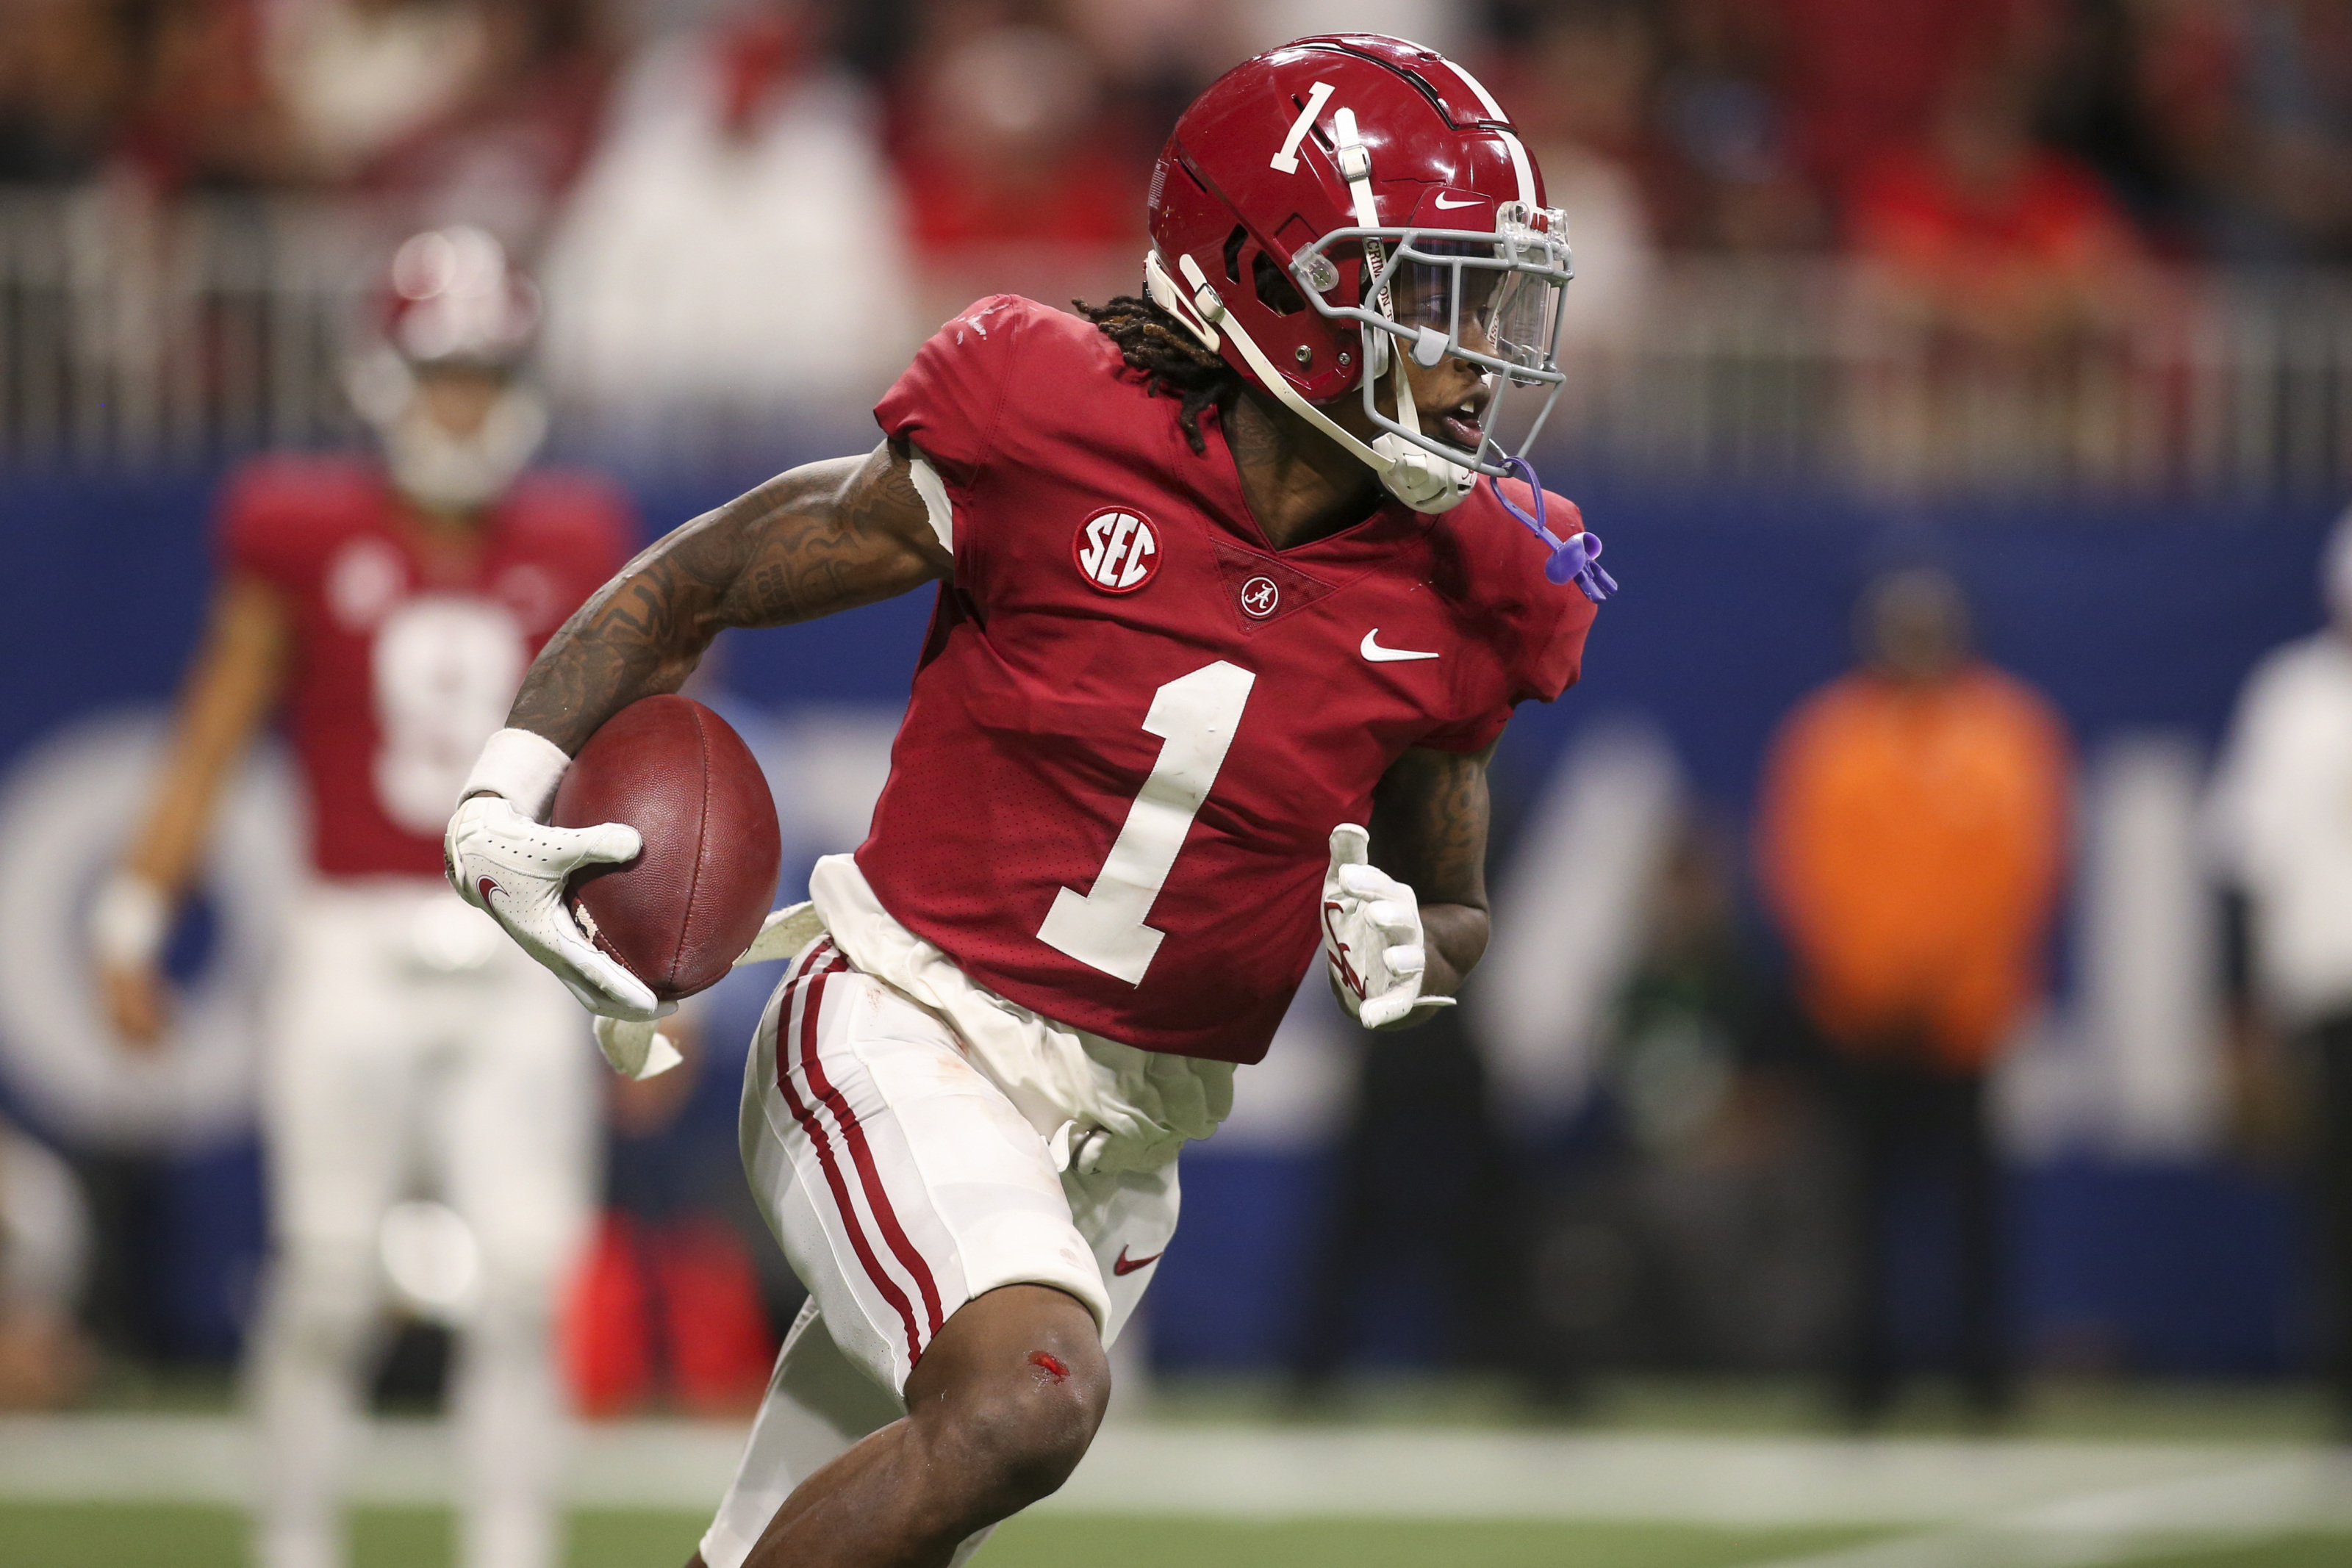 2022 NFL Mock Draft: Jameson Williams The First WR Off The Board?